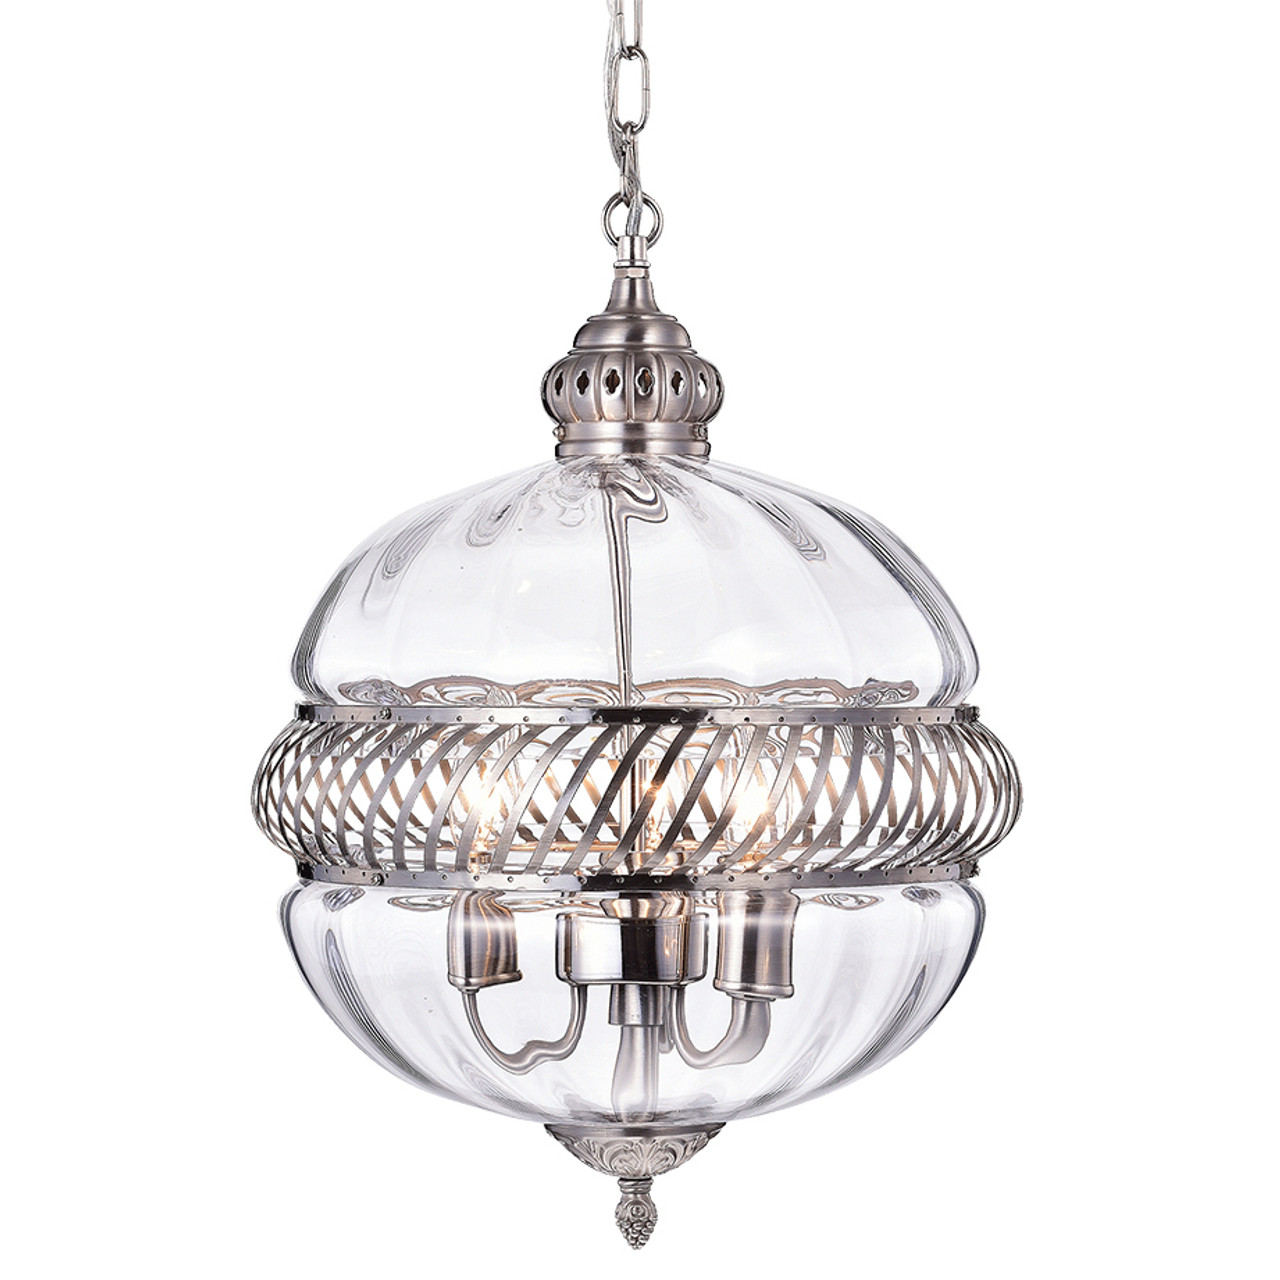 WAREHOUSE OF TIFFANY RL8168PN Permin 13-inch Clear Glass Globe with Metal Accents Pendant Light